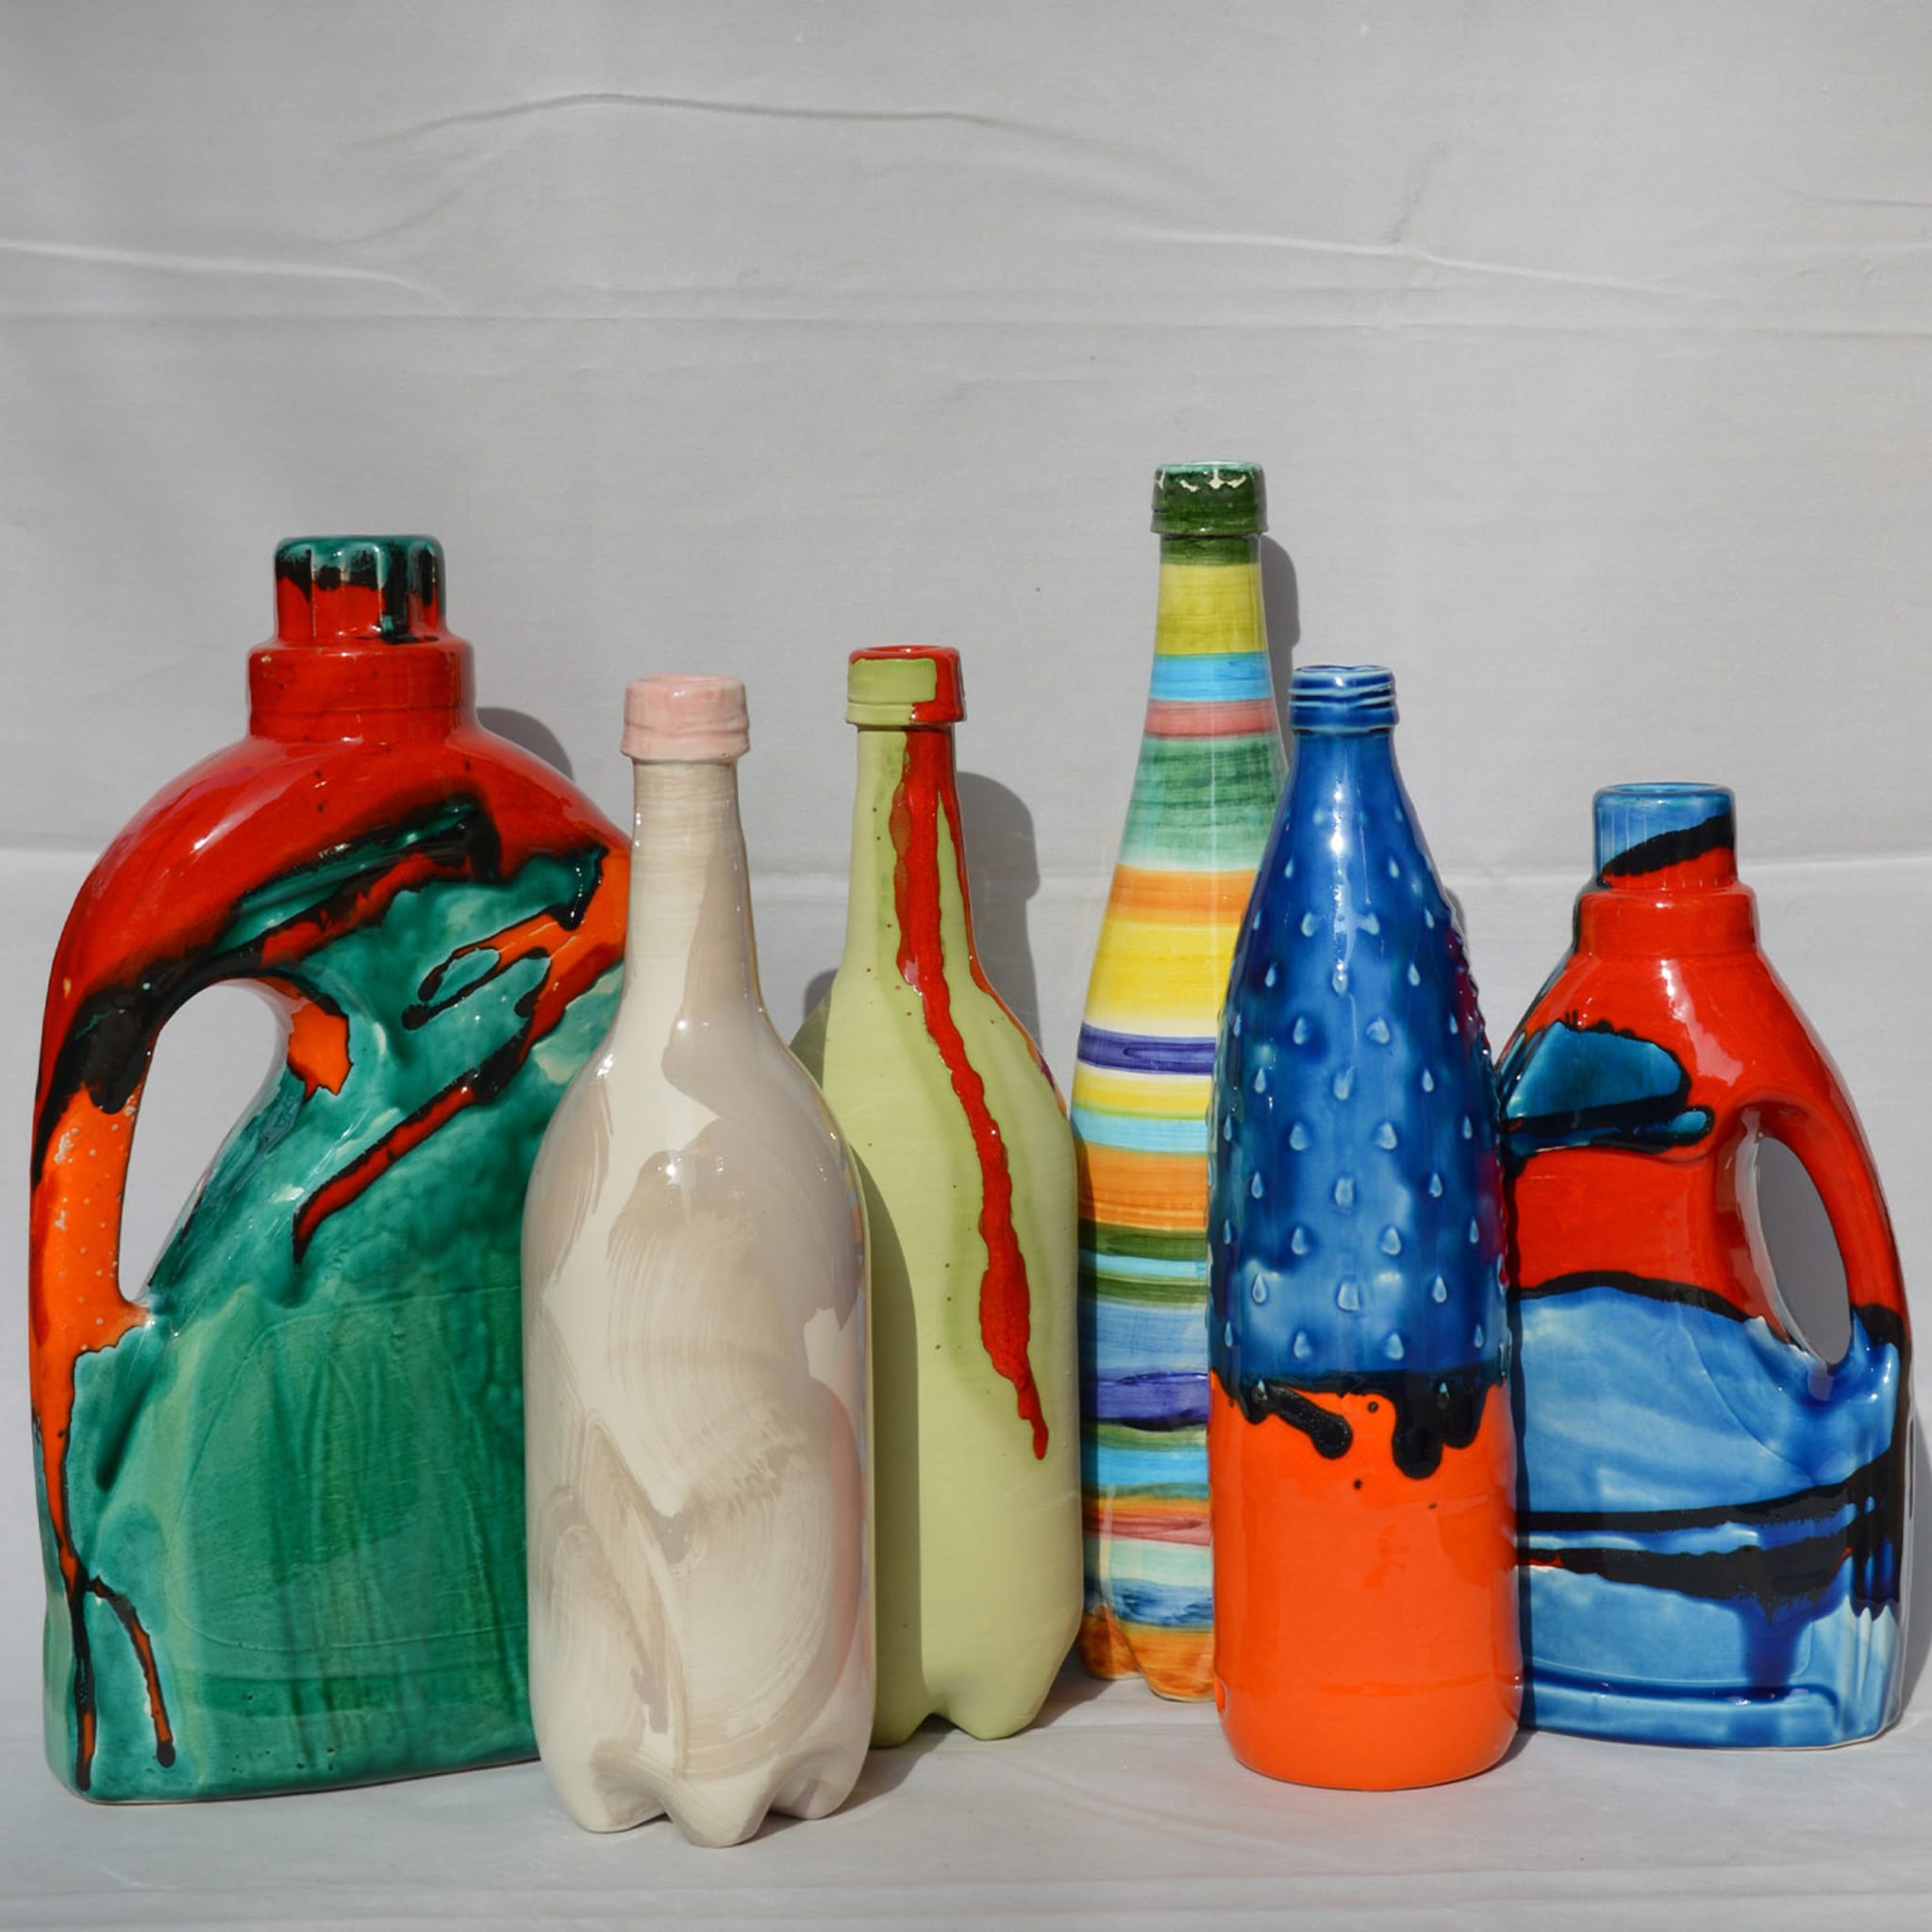 More Clay Less Plastic Green and Red Bottle - Alternative view 2